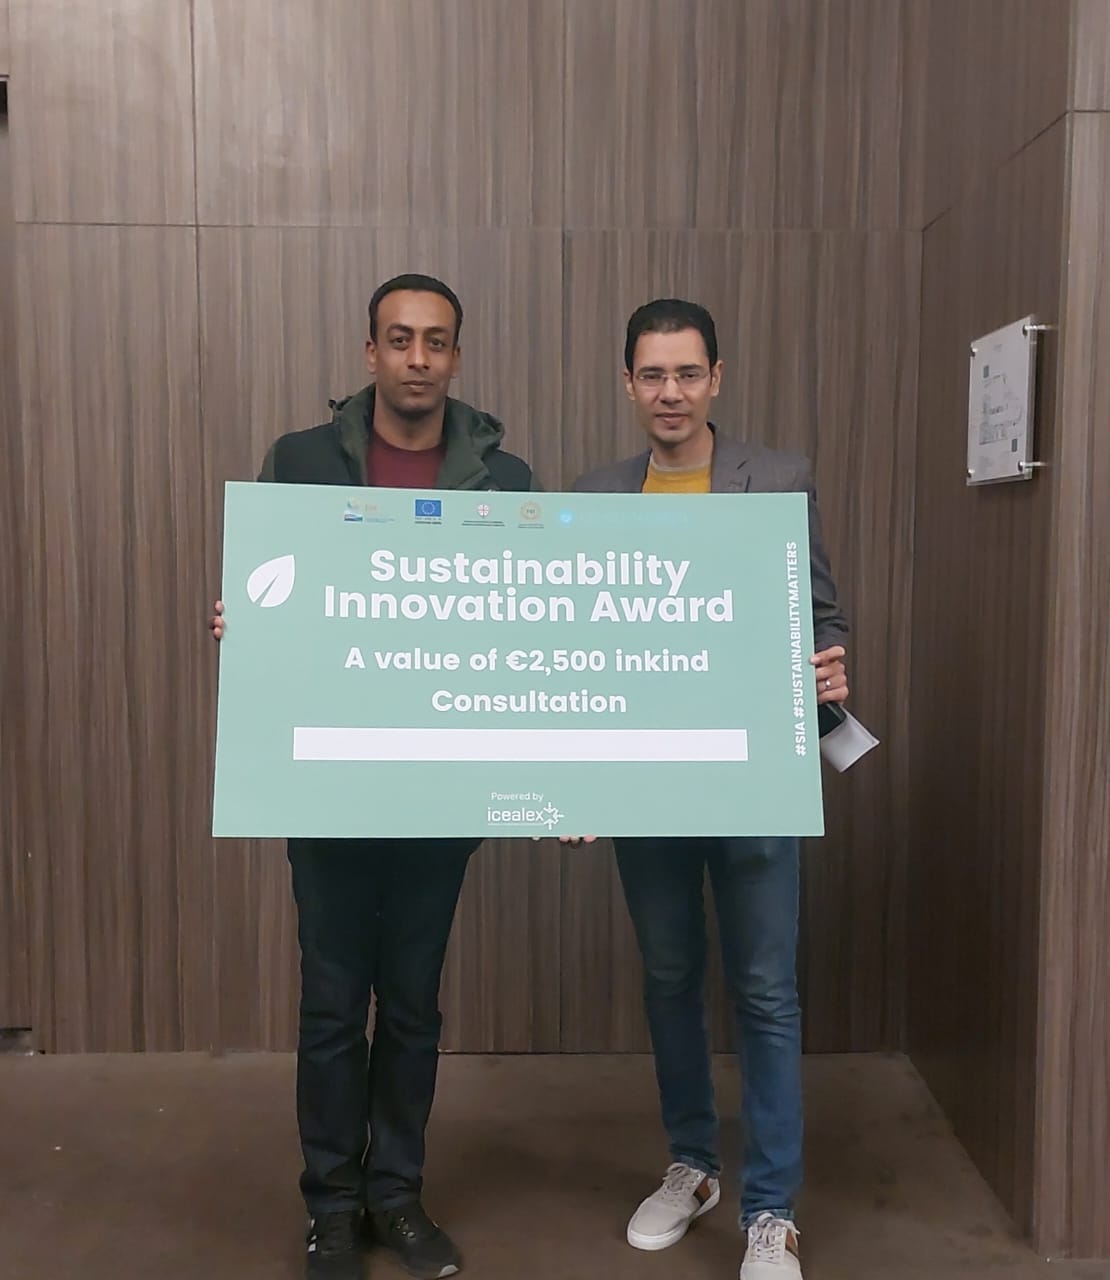 The electronic engineering team in Menoufia wins the award for innovation in sustainability presented by the Federation of Egyptian Industries and the European Union